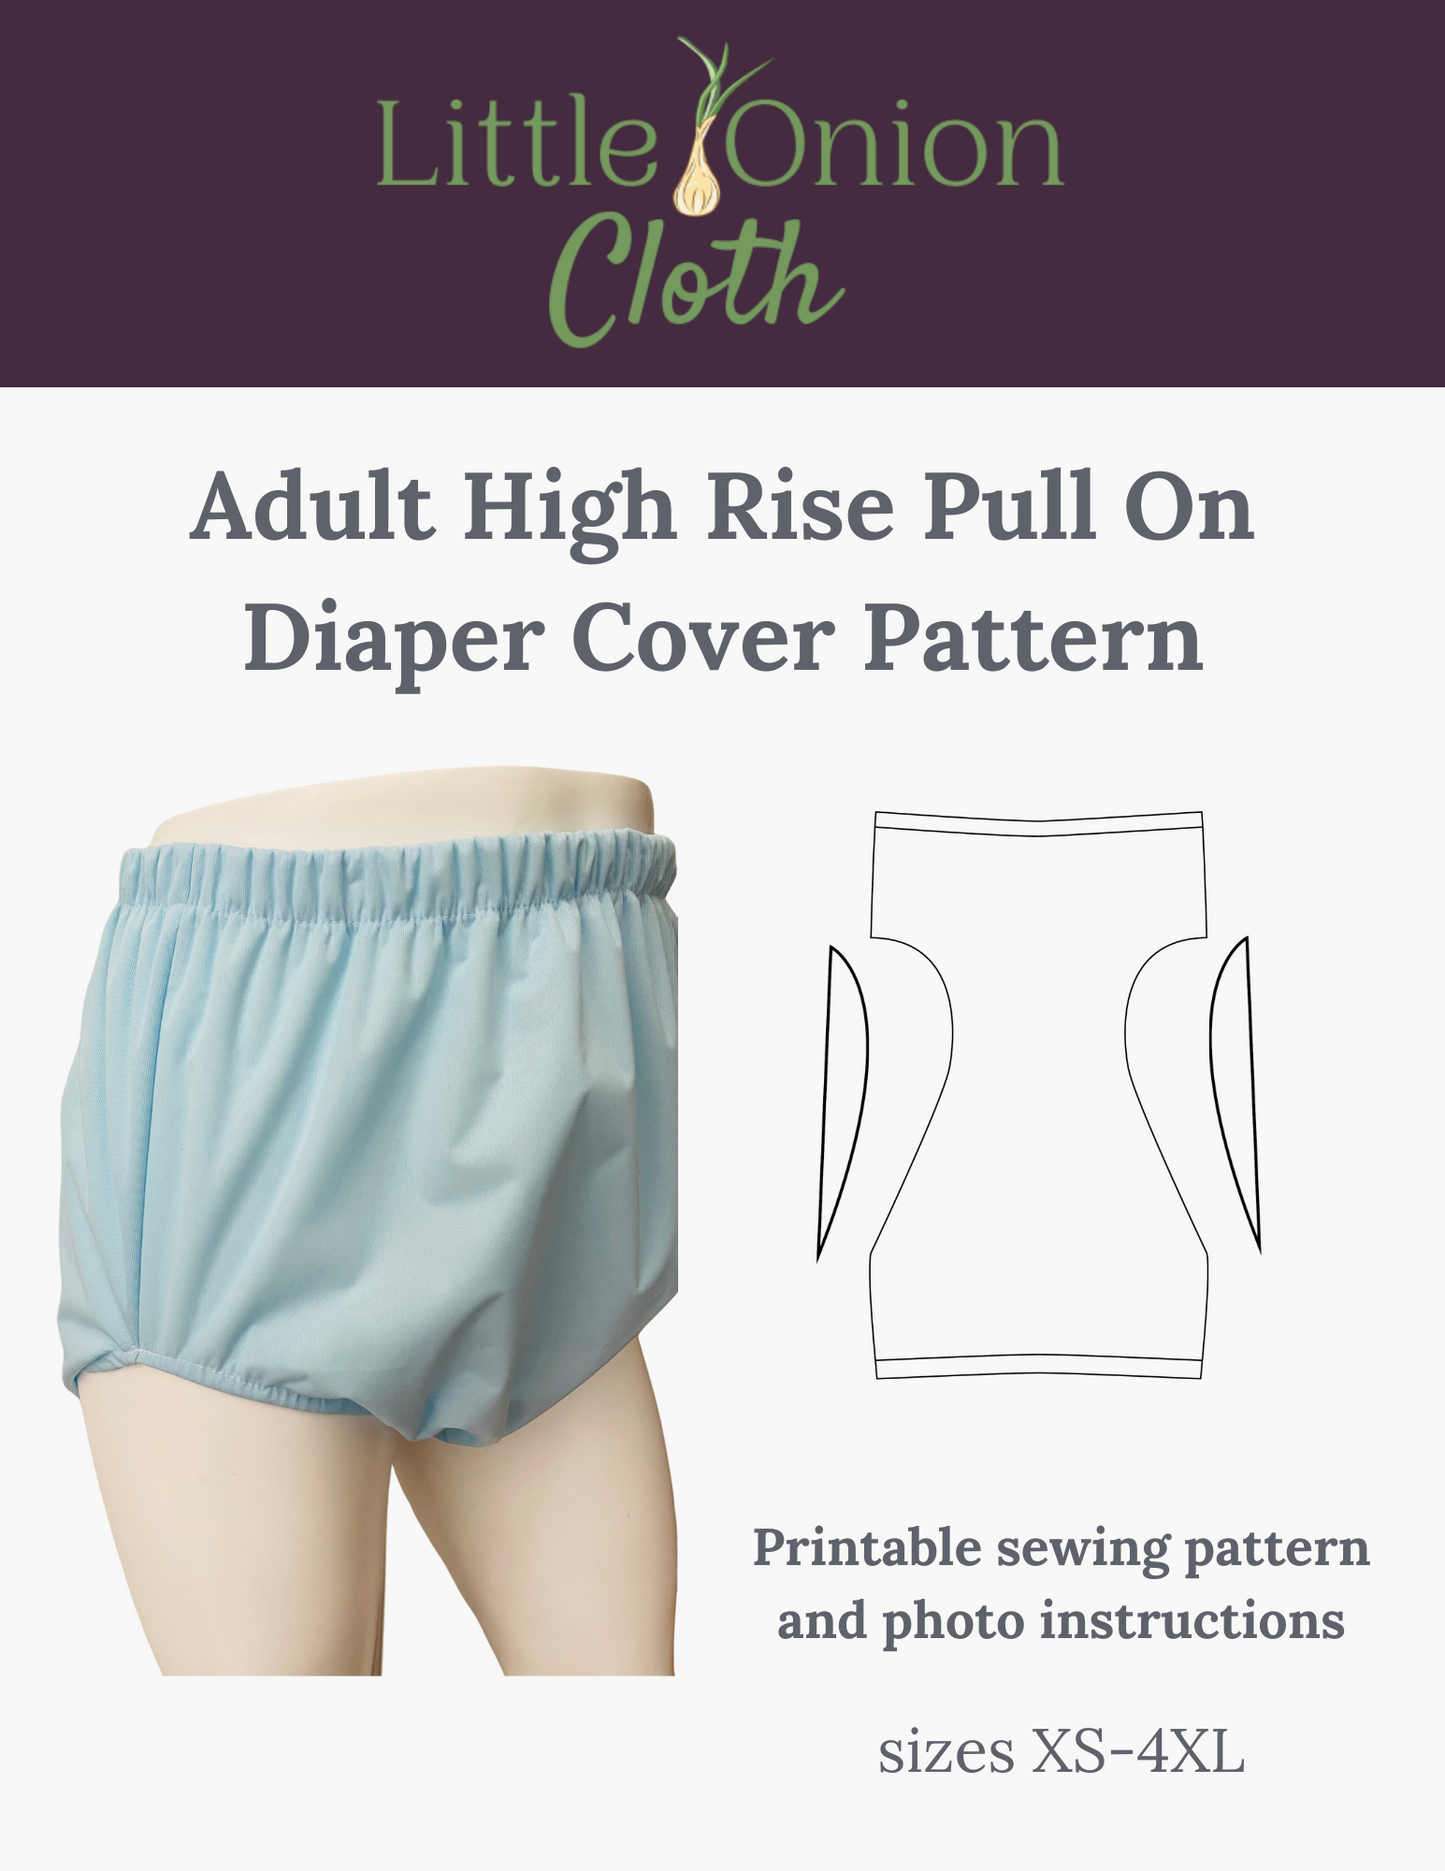 Adult High Rise Pull On Diaper Cover